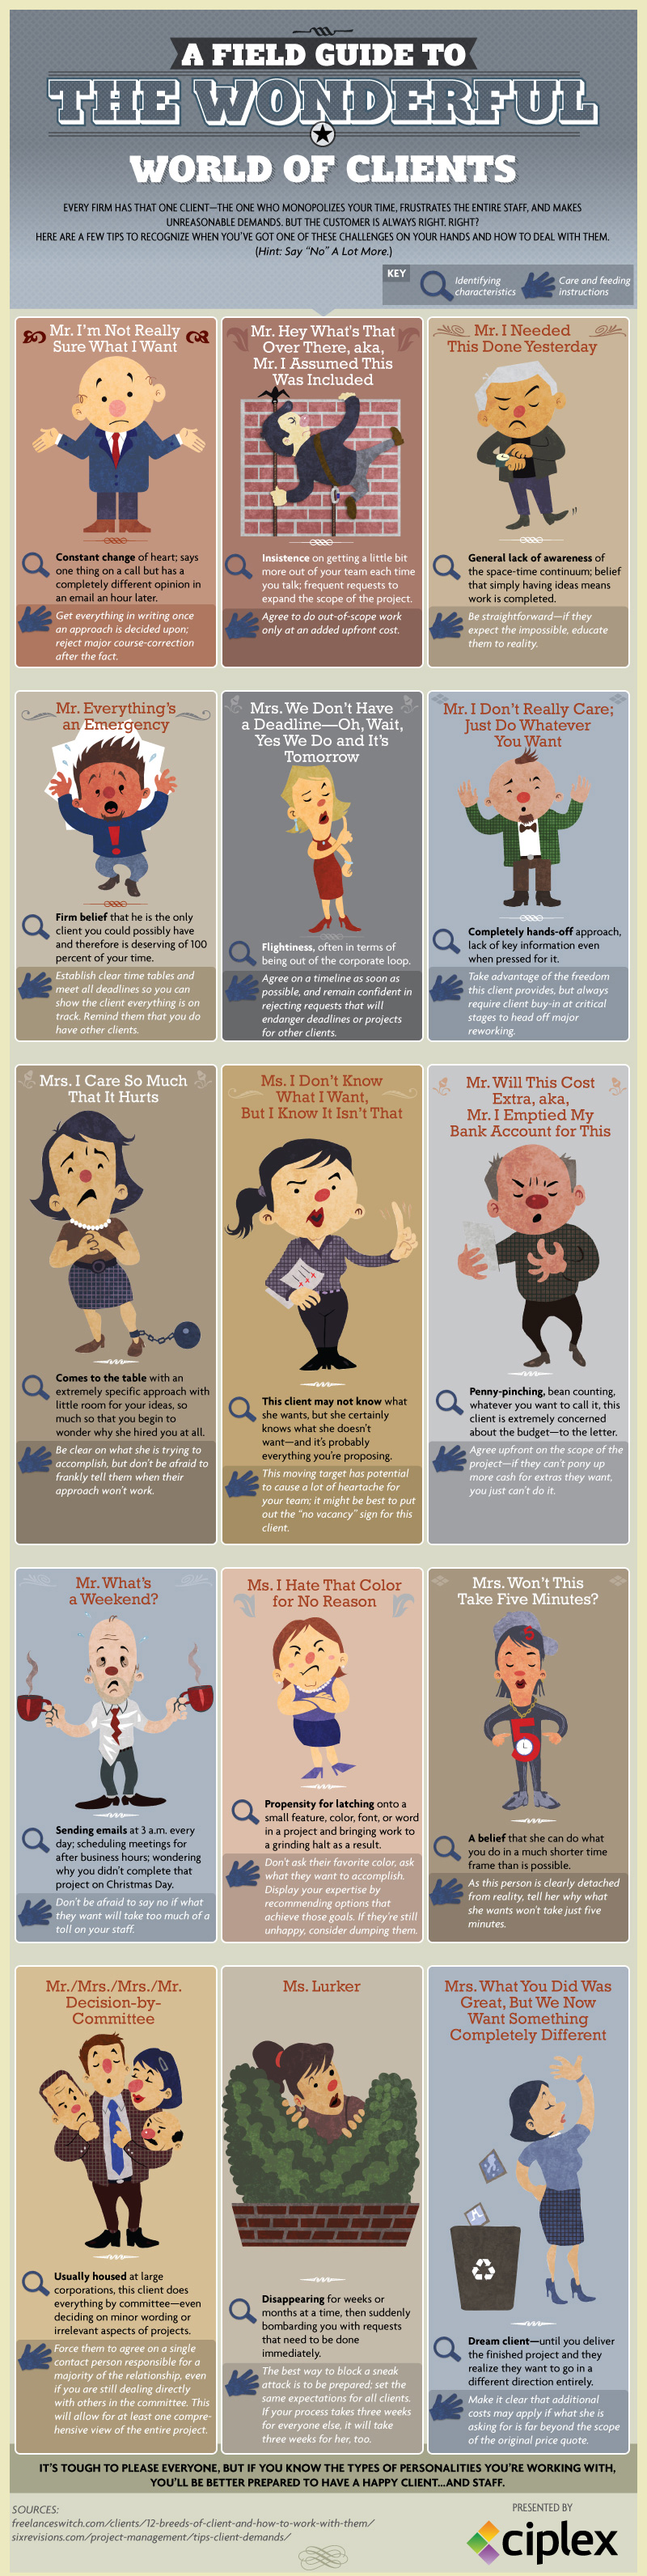 A Field Guide to the Wonderful World of Clients